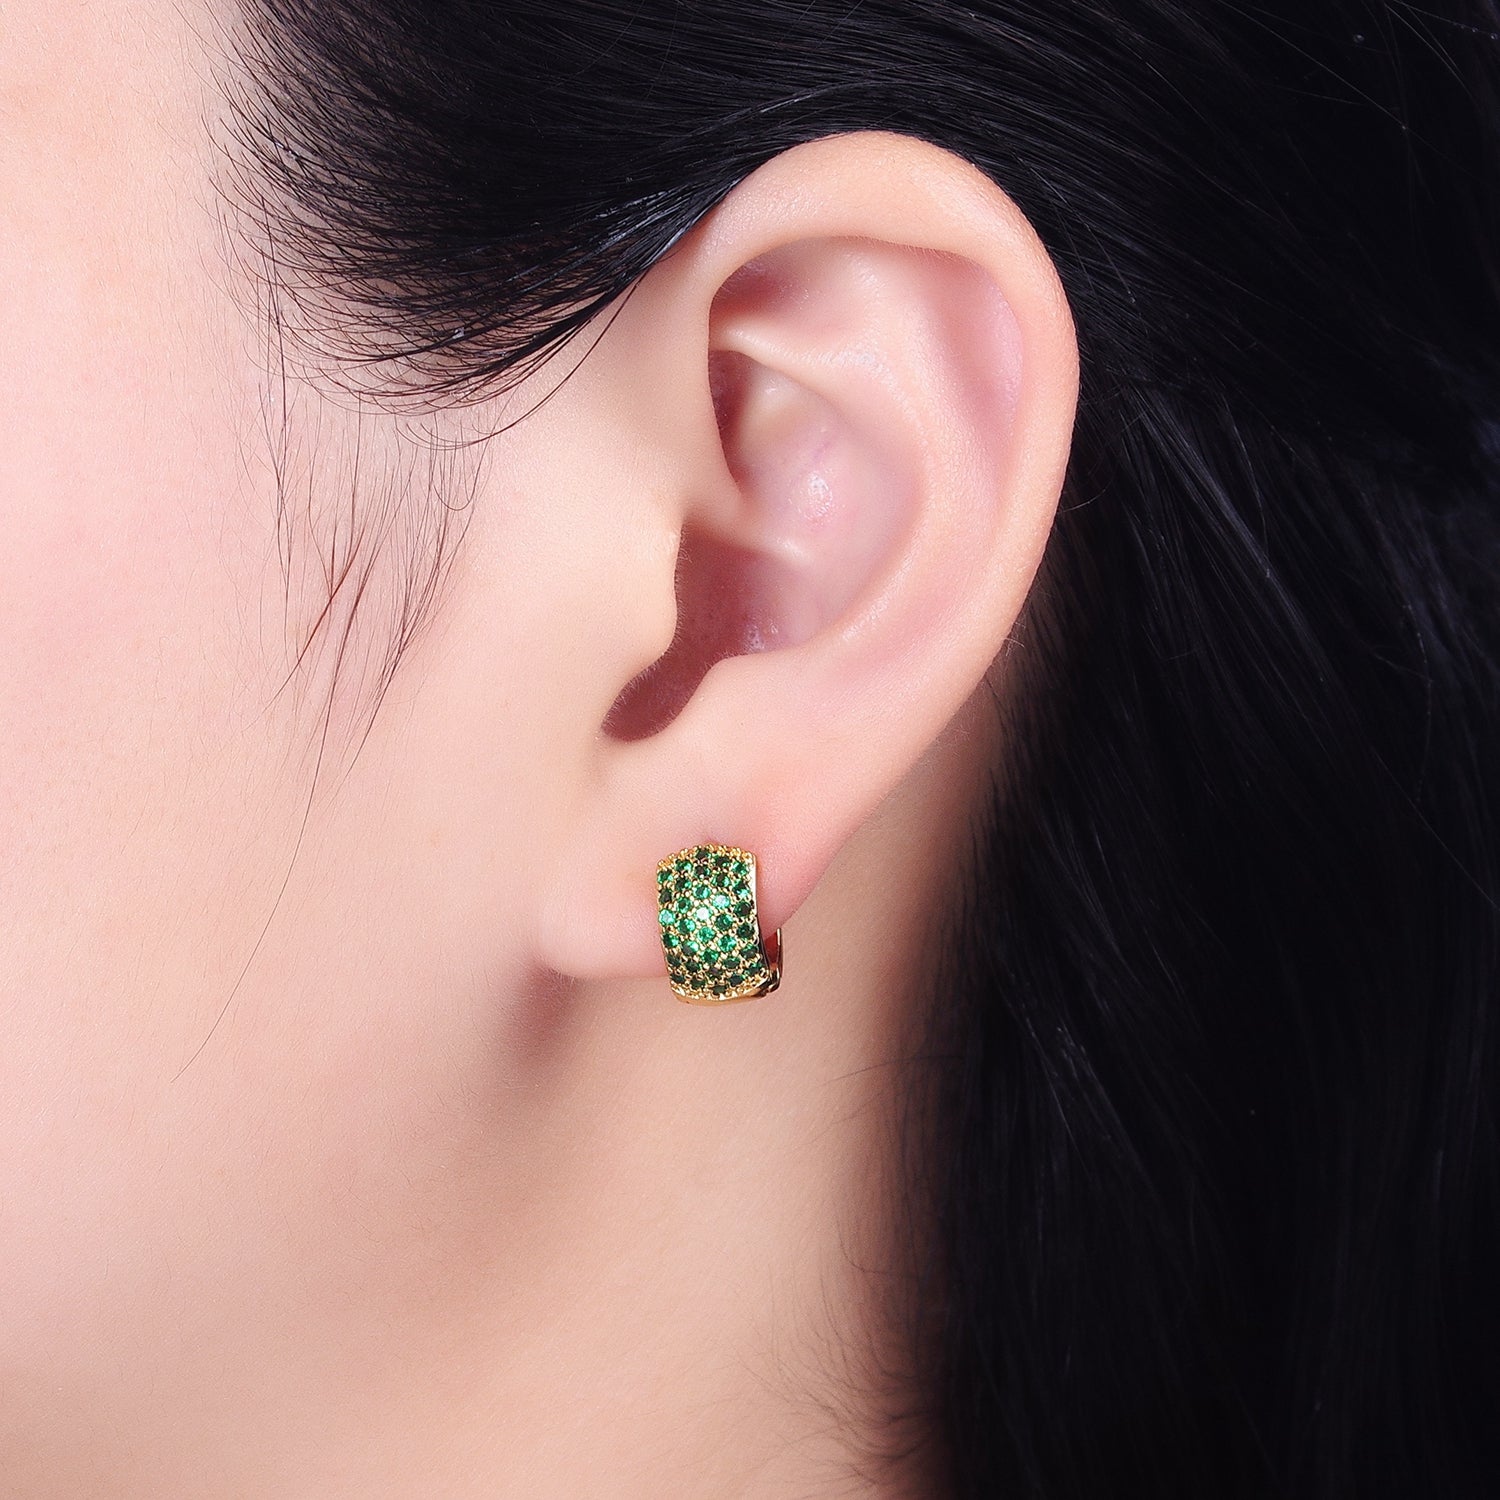 14K Gold Filled Emerald Green Micro Paved CZ Wide 13mm Huggie Earrings in Gold & Silver | AB1514 AB1515 - DLUXCA